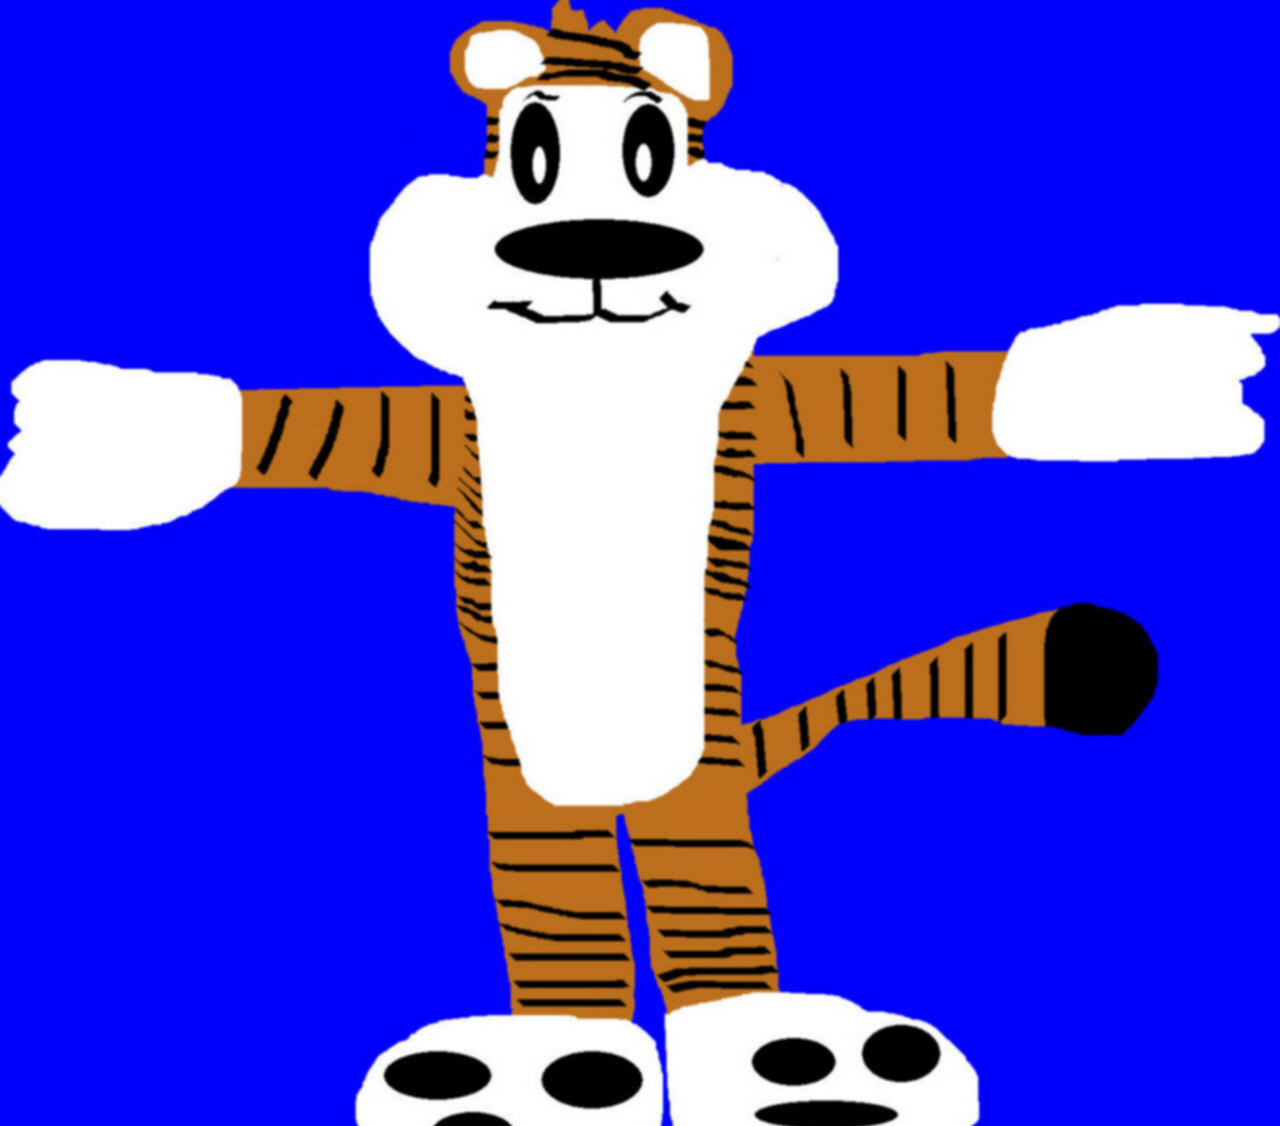 Hobbes MS Paint B Day Gift For Robyn_Paperdoll by Falconlobo